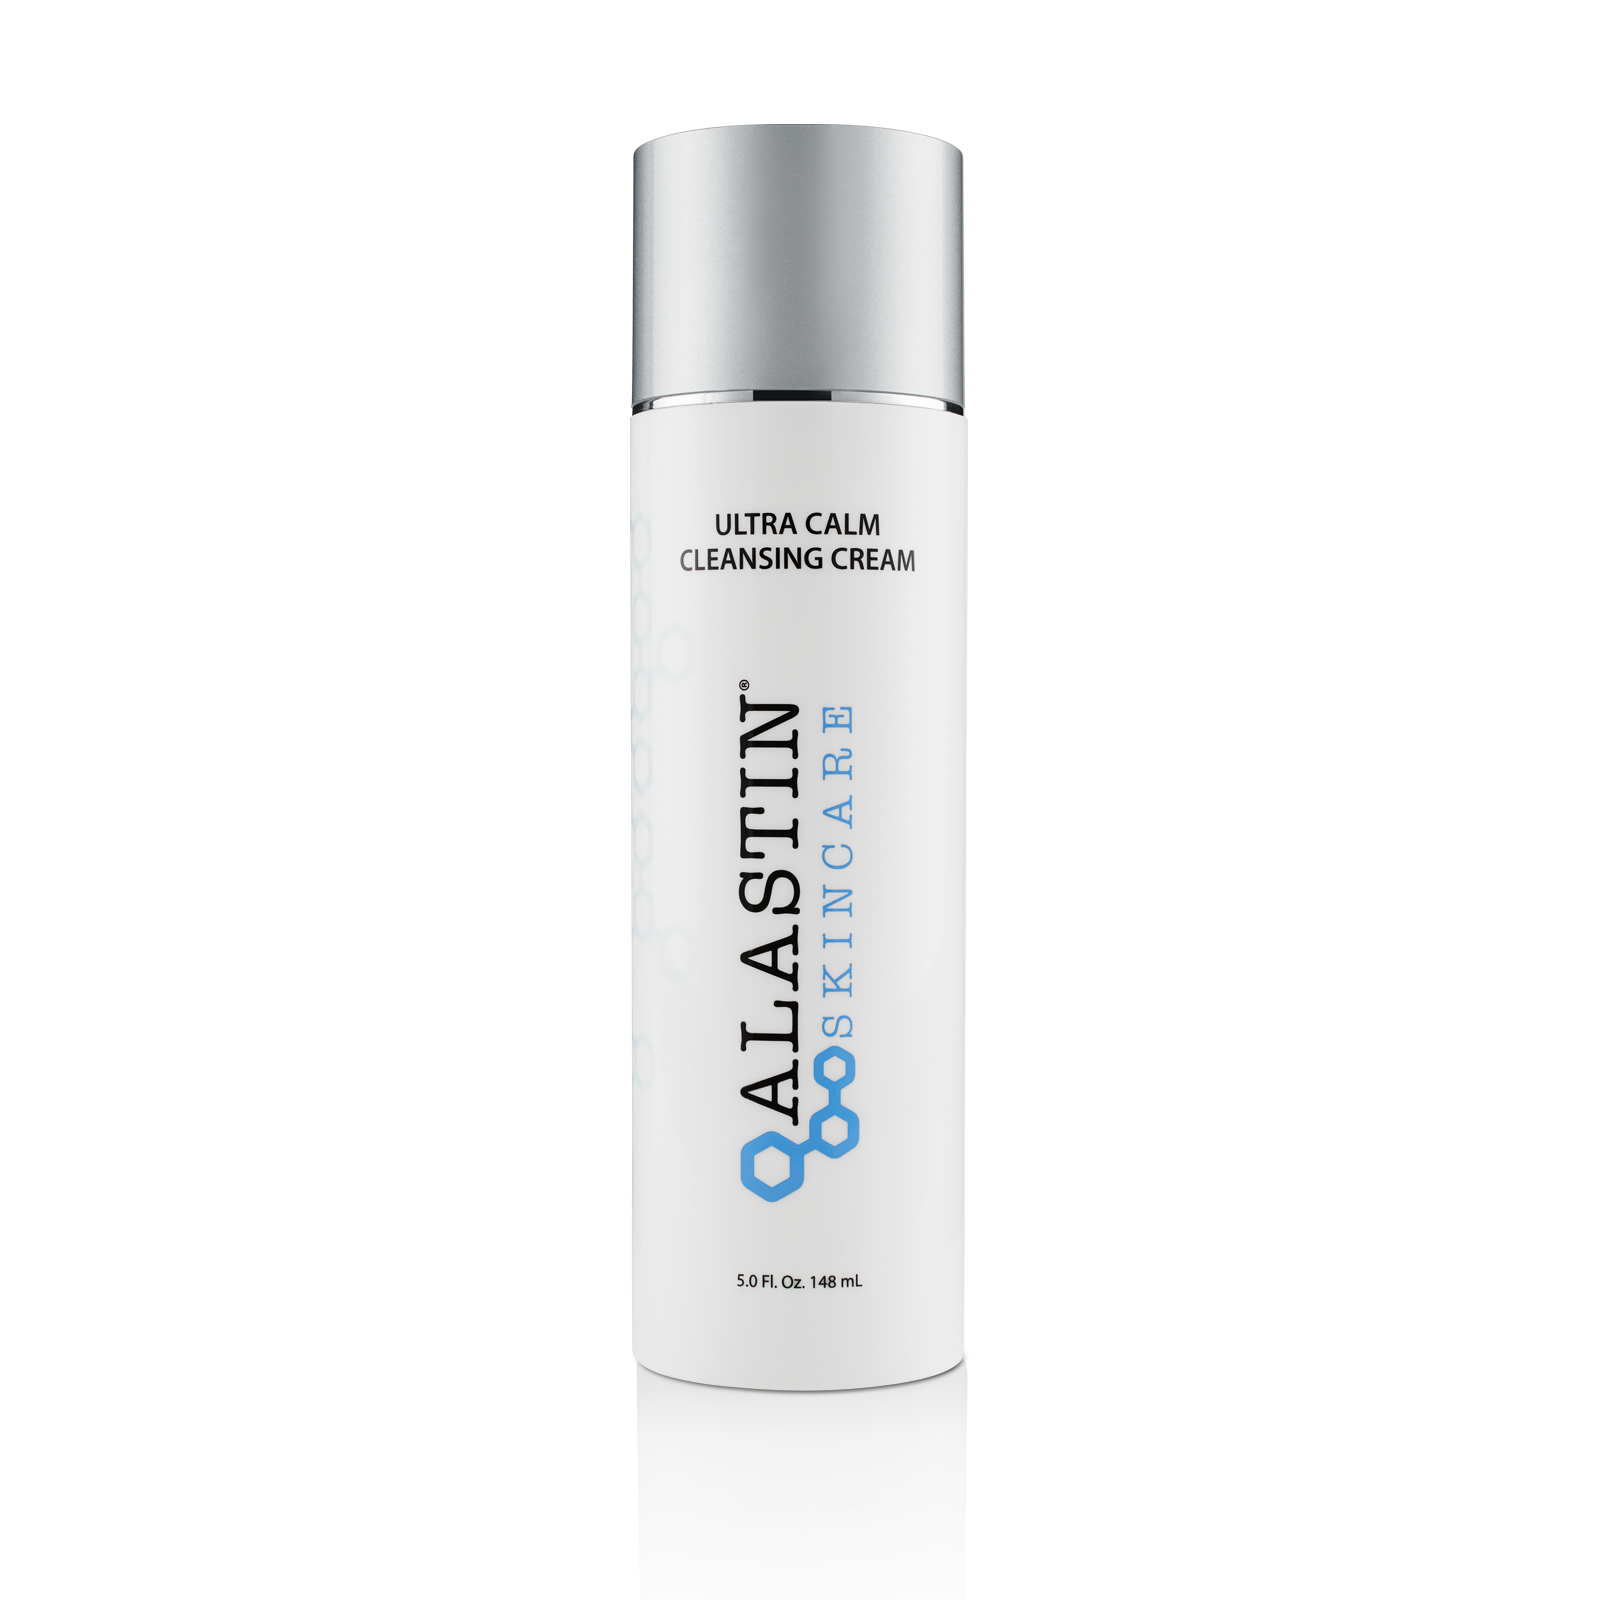 Soothe + Protect Recovery Balm | ALASTIN Skincare®